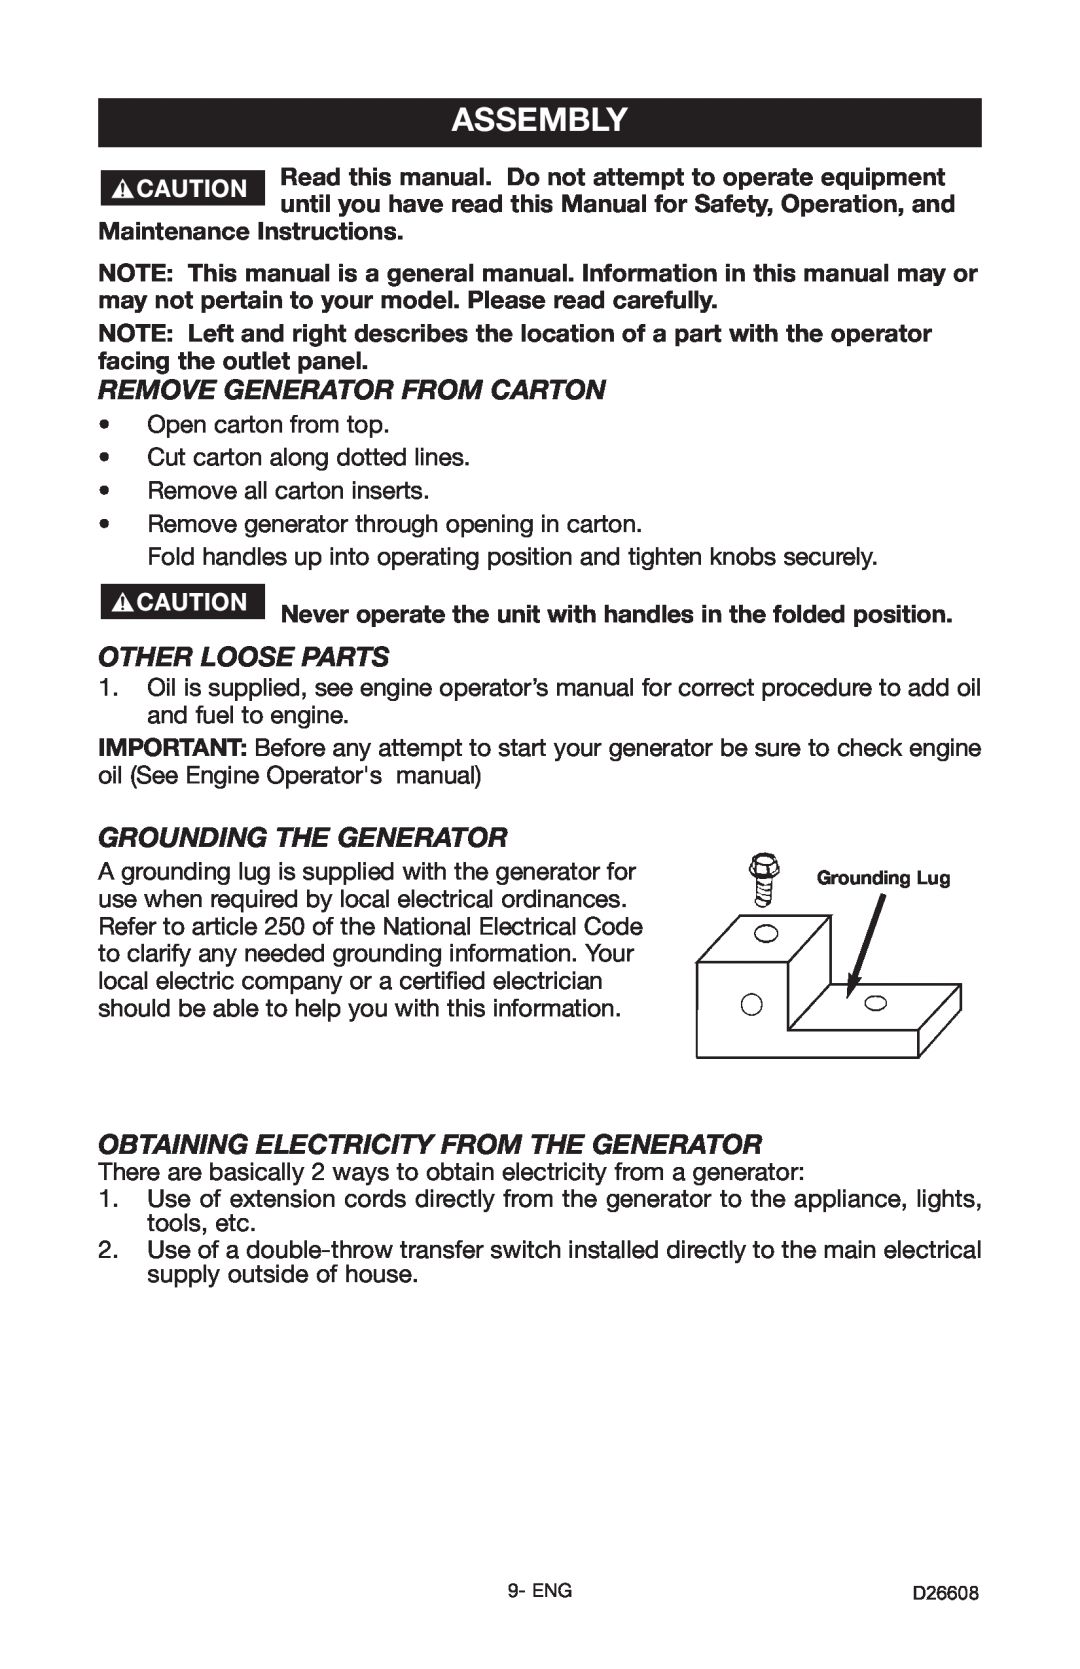 Porter-Cable DBSI325 instruction manual Assembly, Remove Generator From Carton, Other Loose Parts, Grounding The Generator 